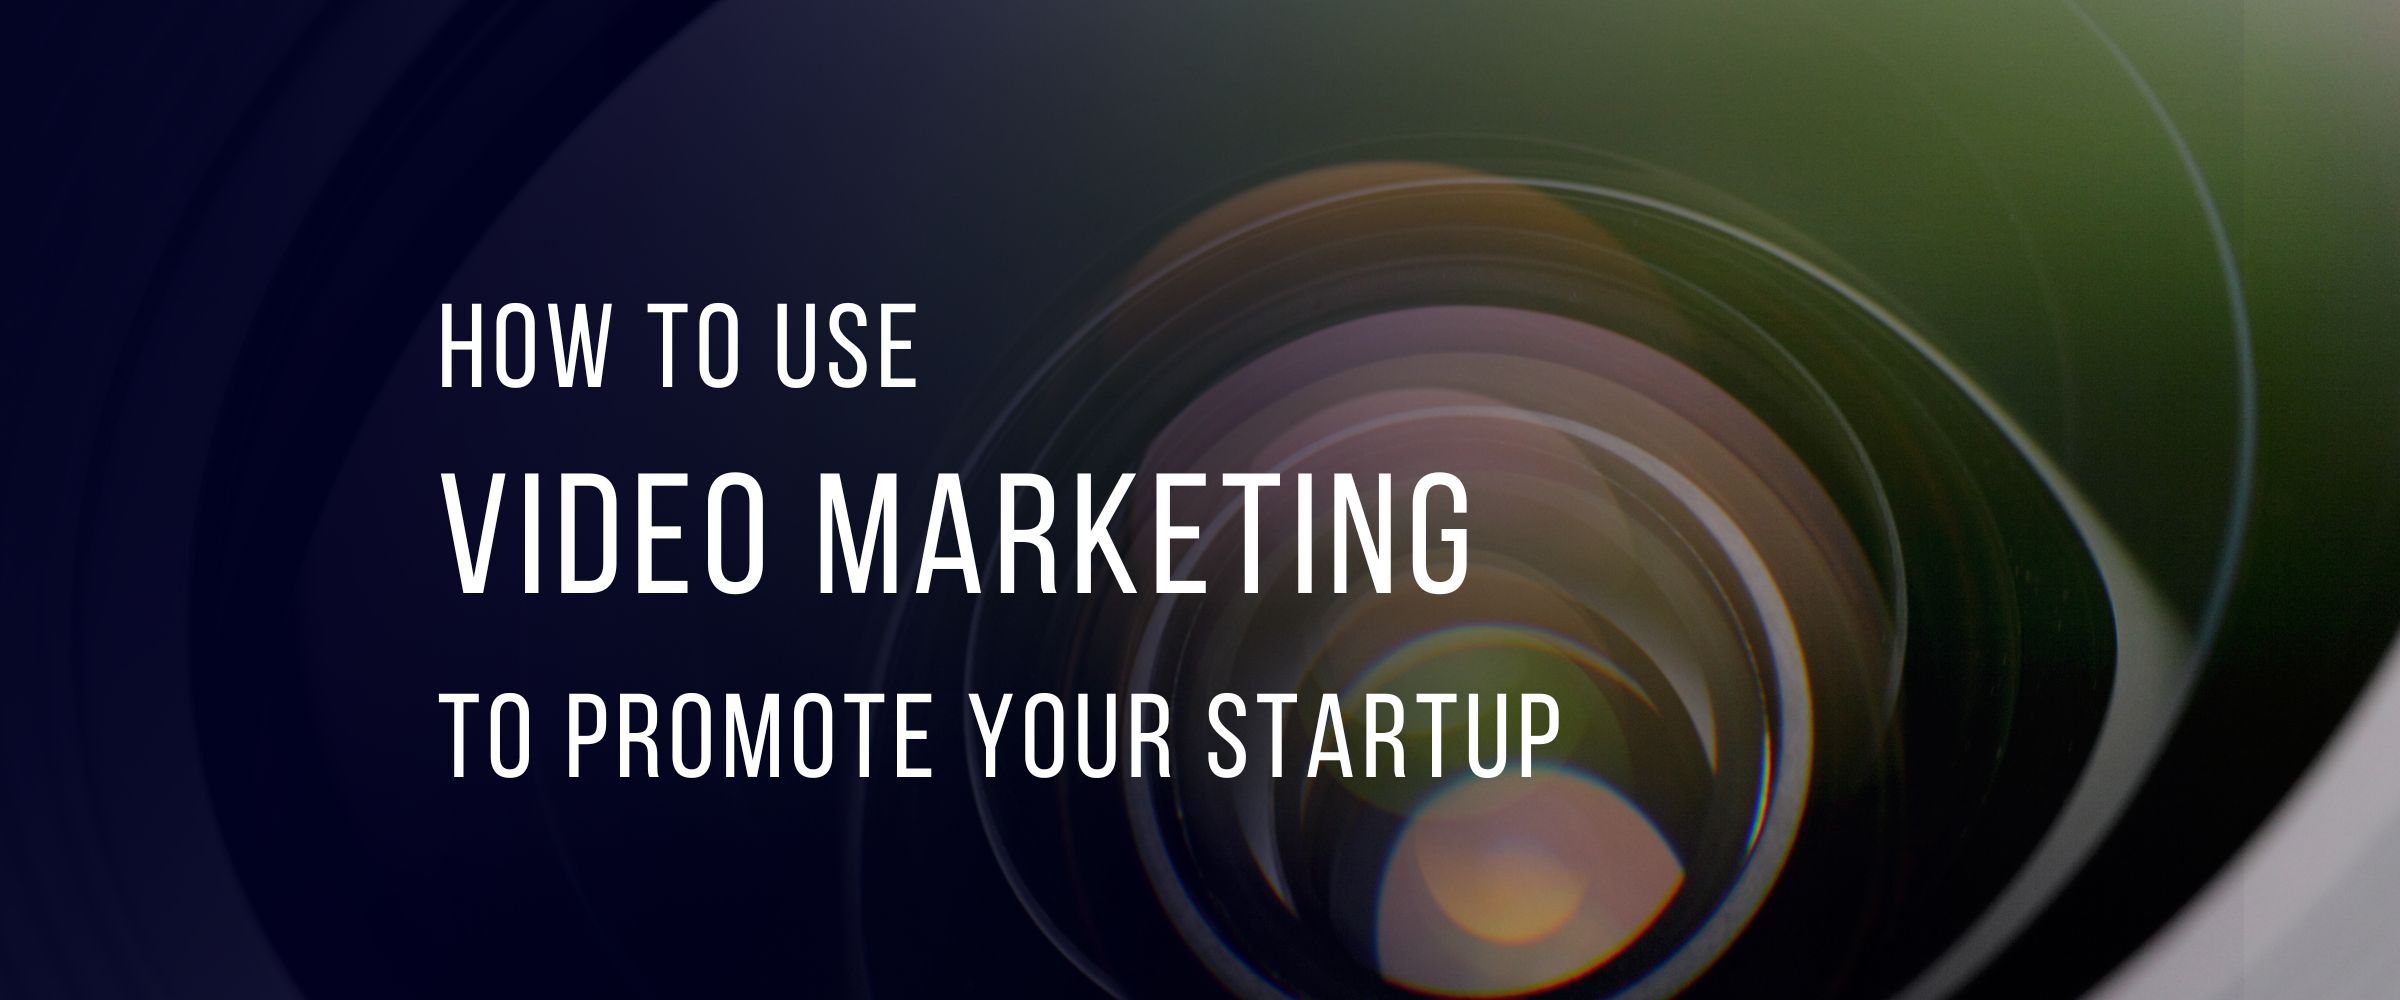 Use Video Marketing to Promote your Startup